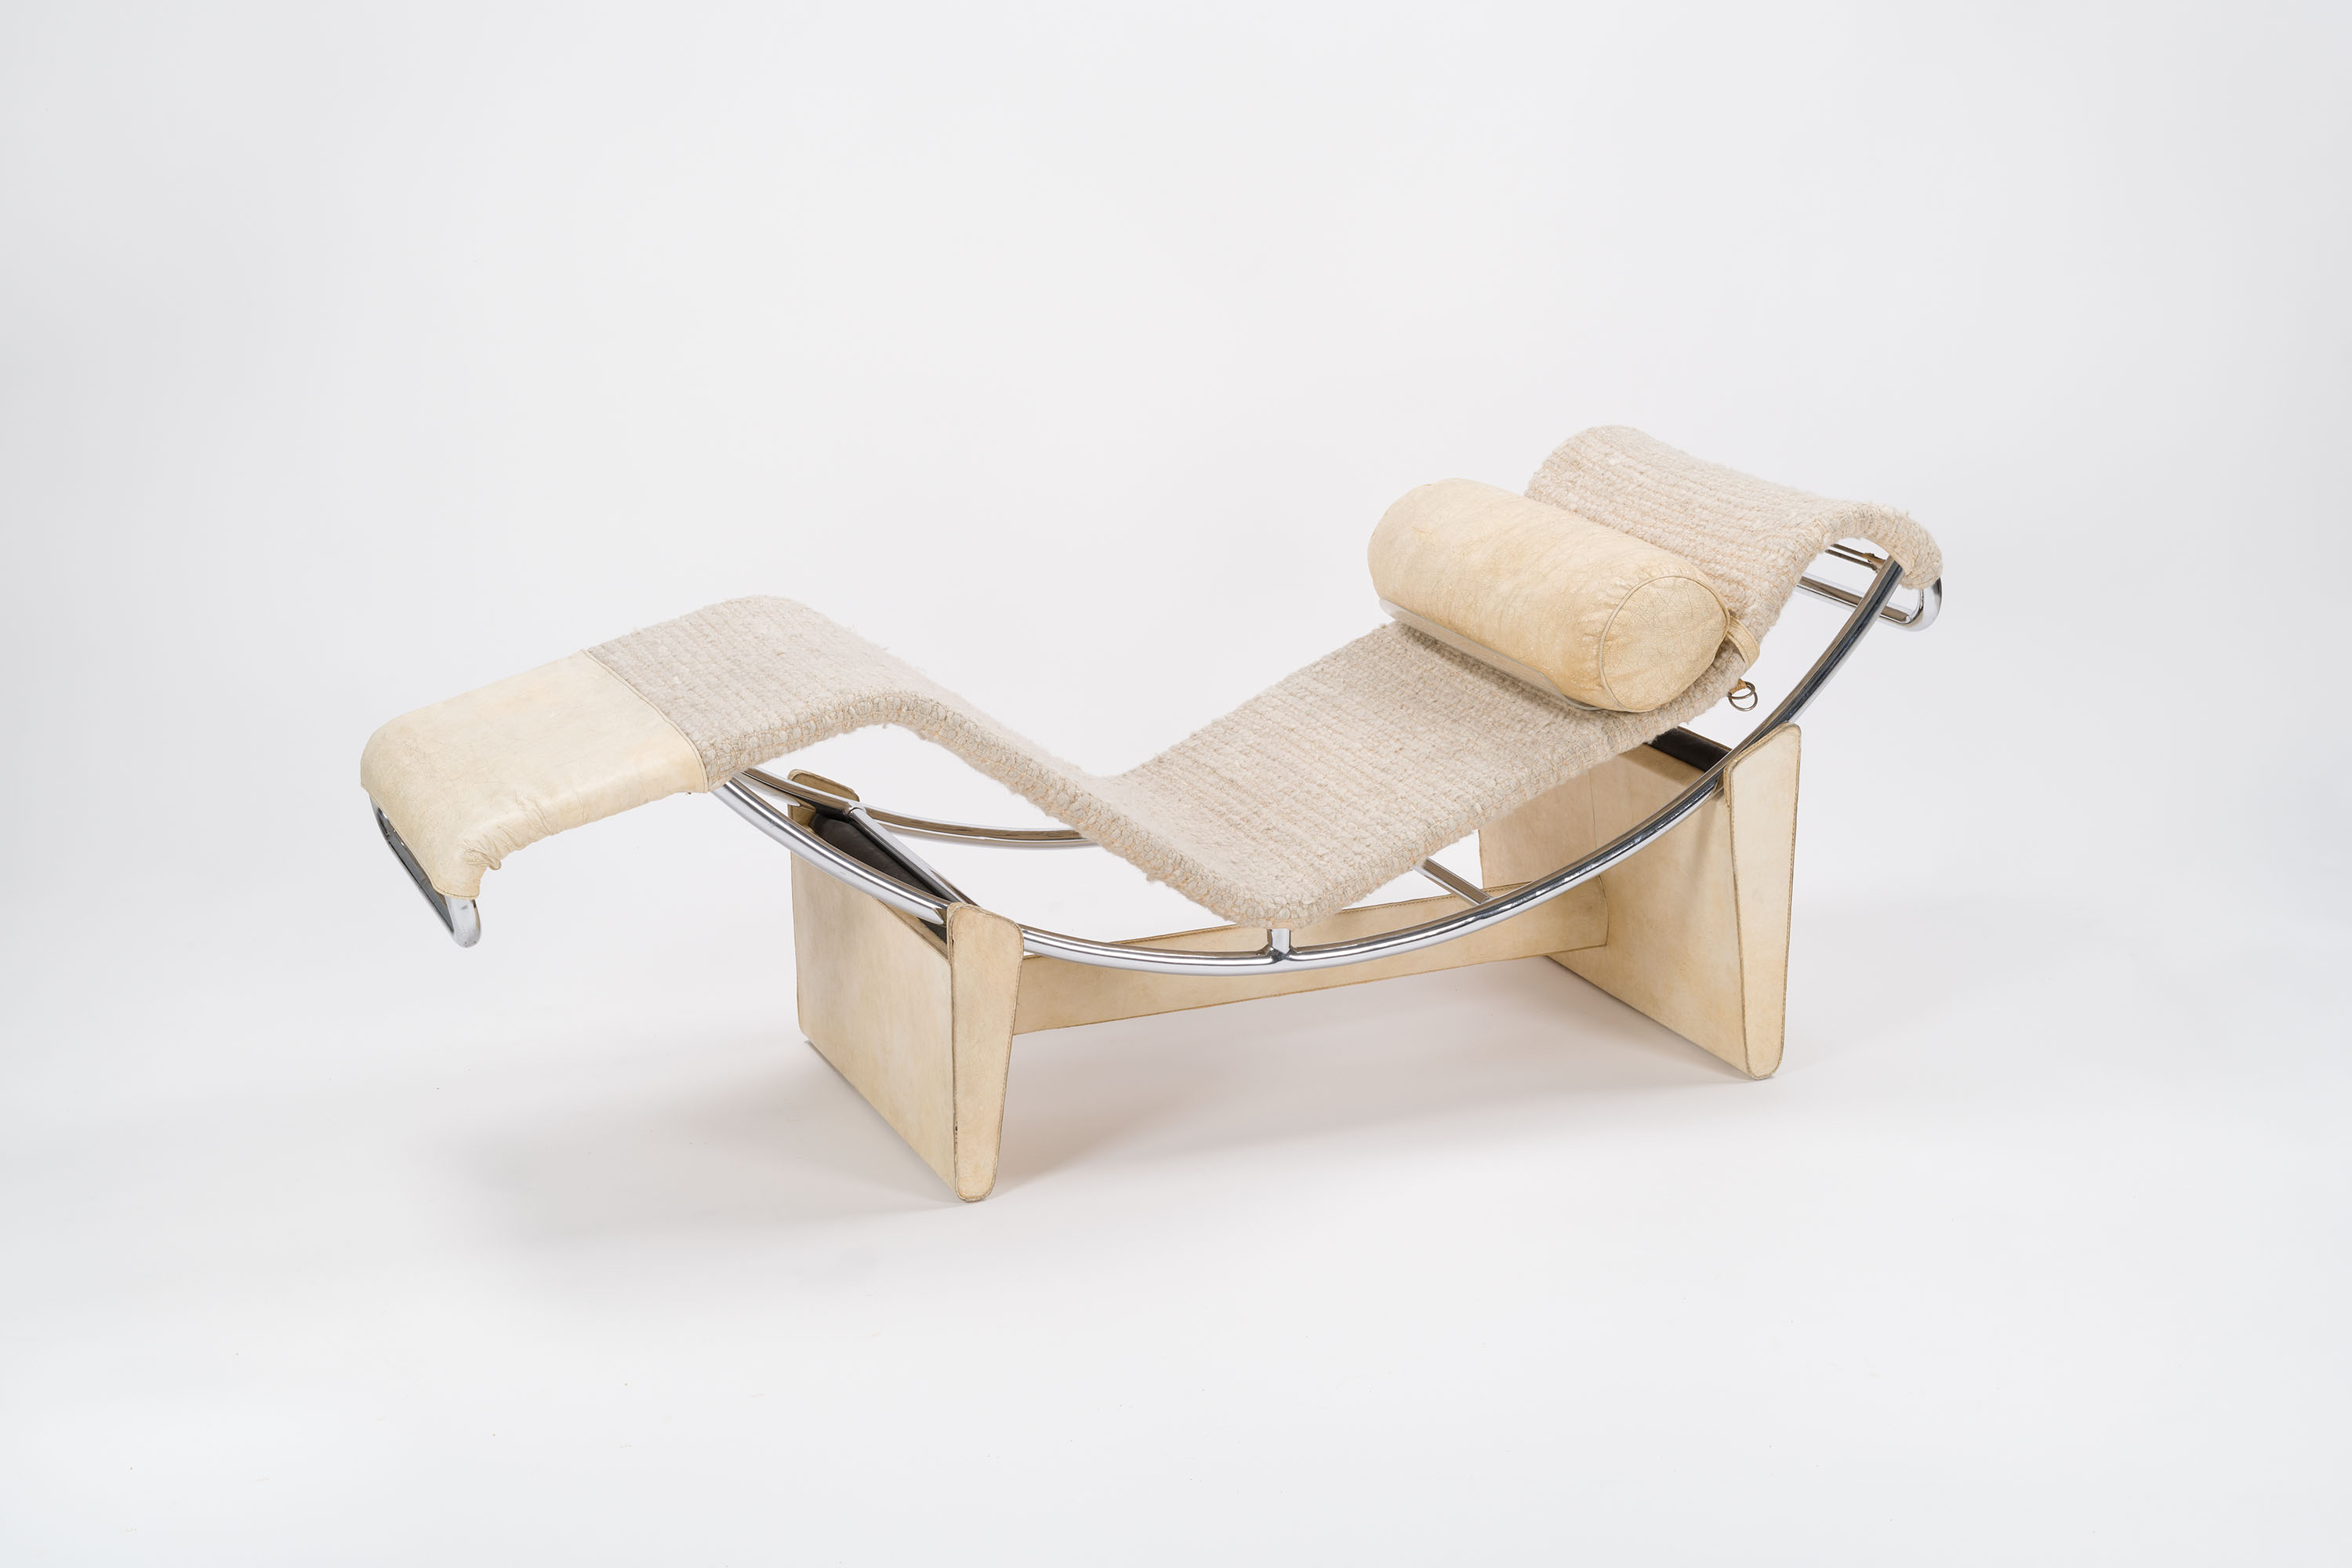 a Chaise longue with neutral leather and rounded metal tubes